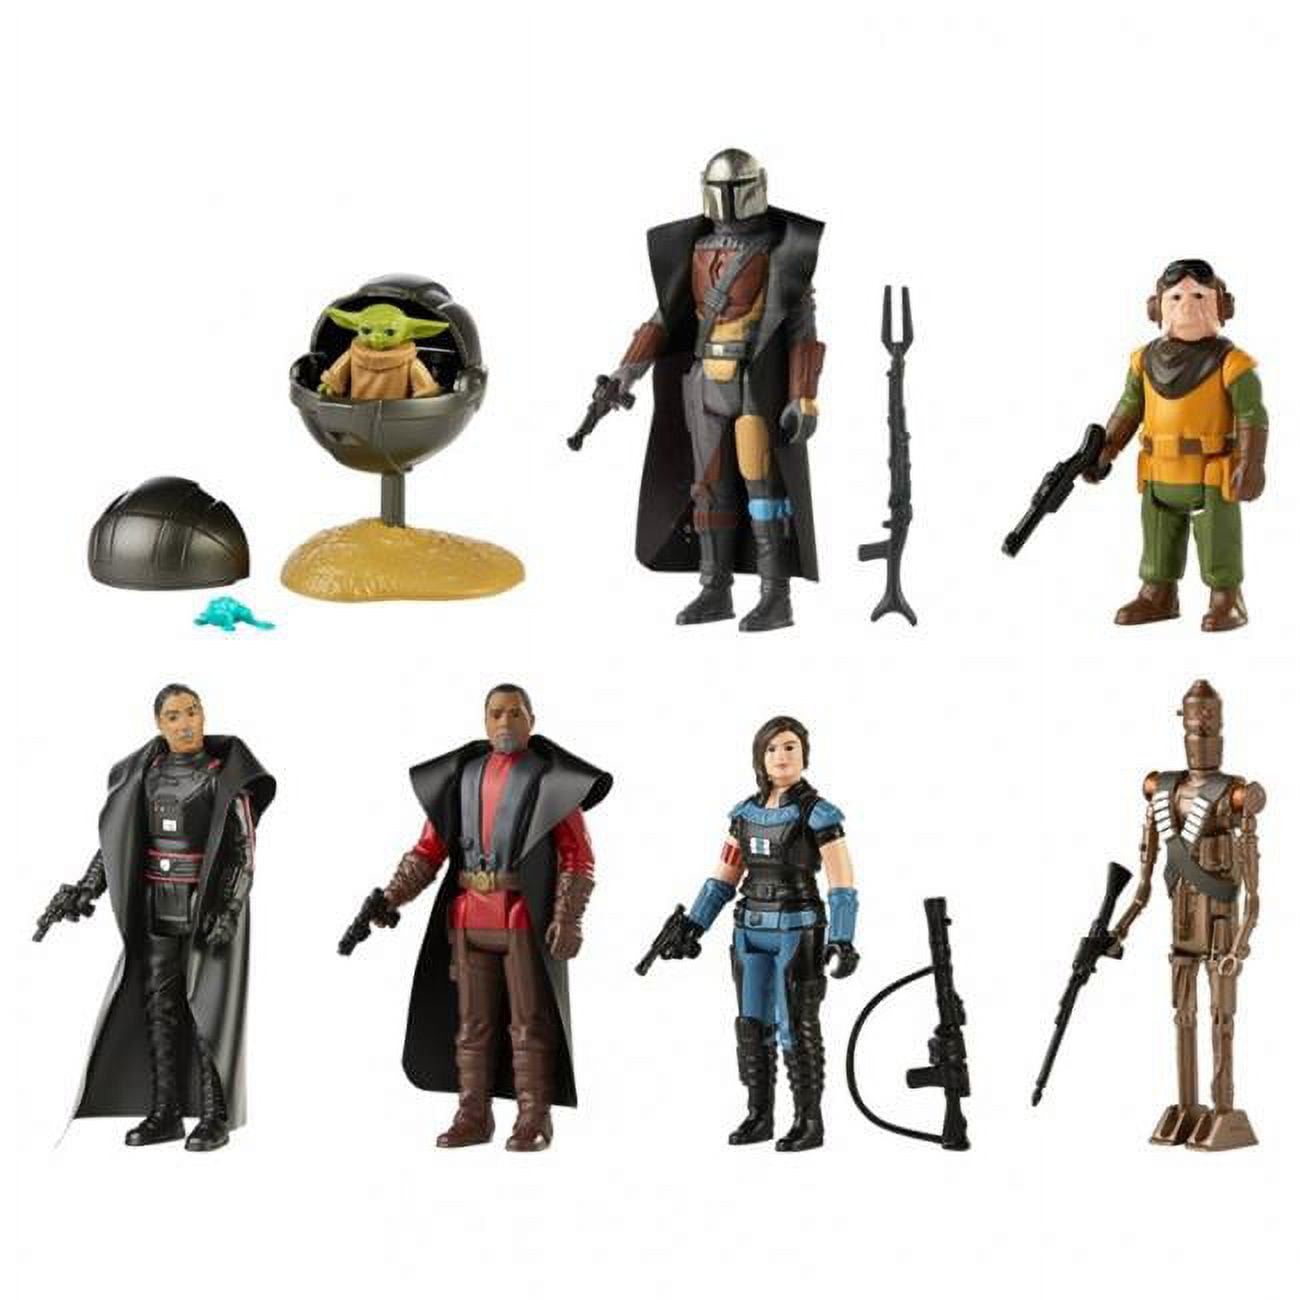 Play4Hours Star Wars BK Ser Mandalorian Retro Assorted Action Figure - Pack of 8